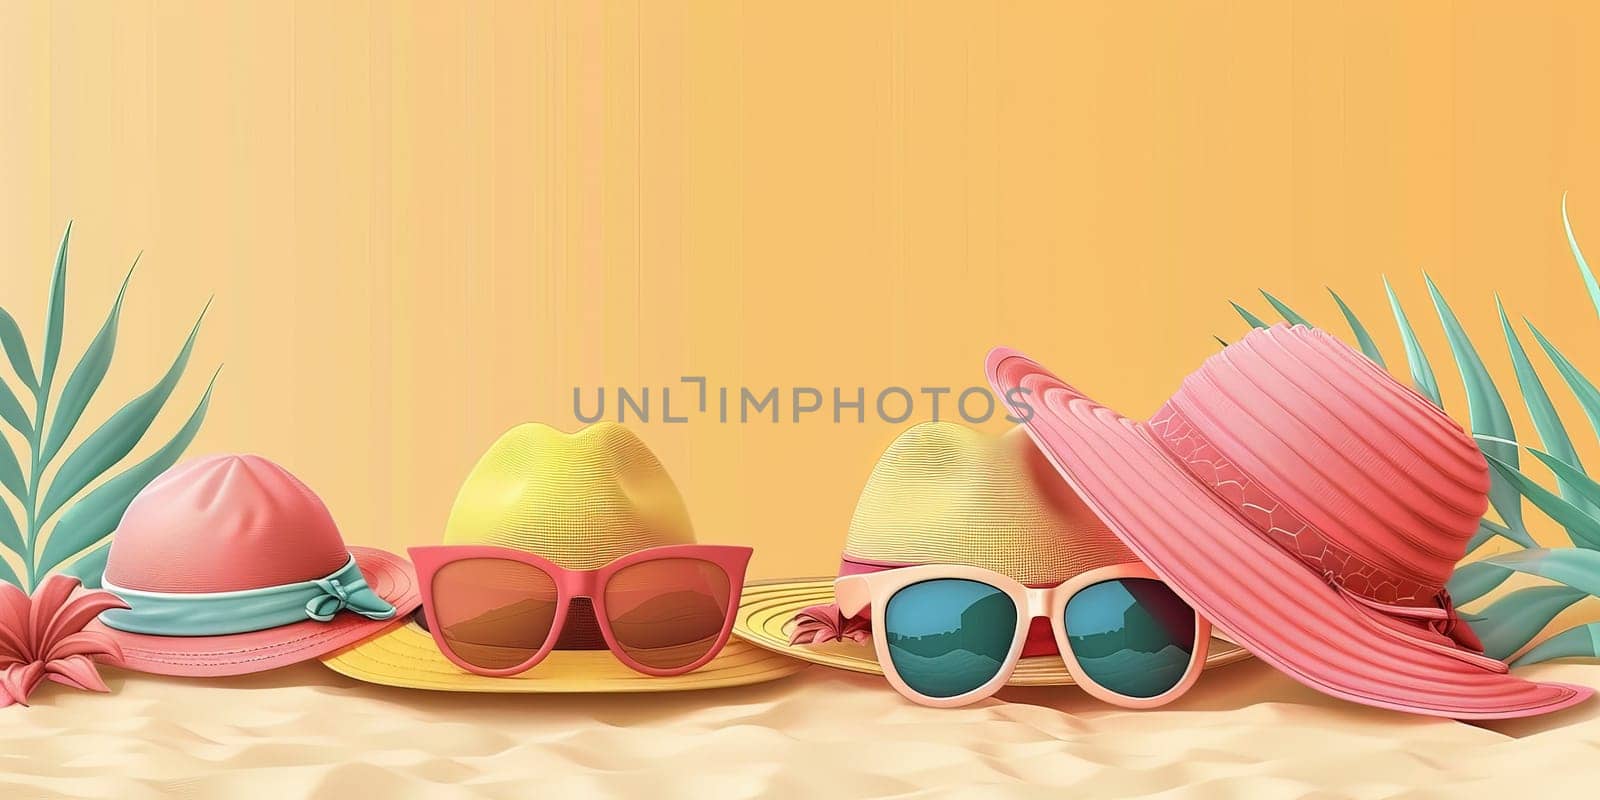 A row of hats and sunglasses on a beach. The hats are pink and yellow, and the sunglasses are blue. The scene is bright and cheerful, with the hats